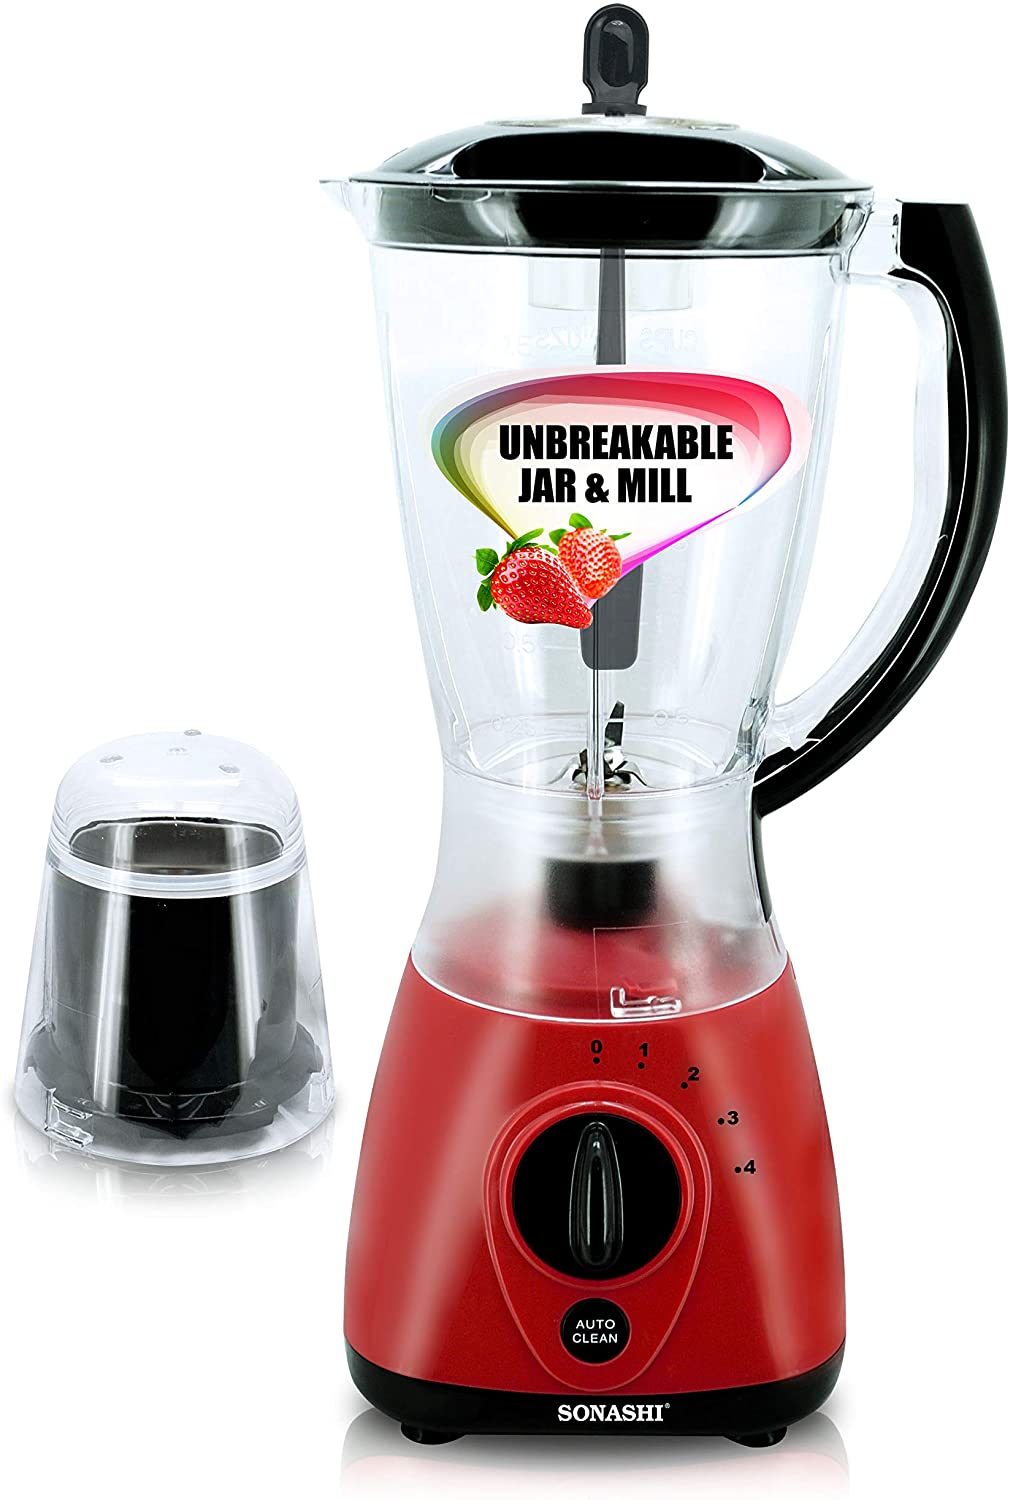 Sonashi 2 In 1 Unbreakable Jar And Mill Countertop Blender - SB-154 (Red)